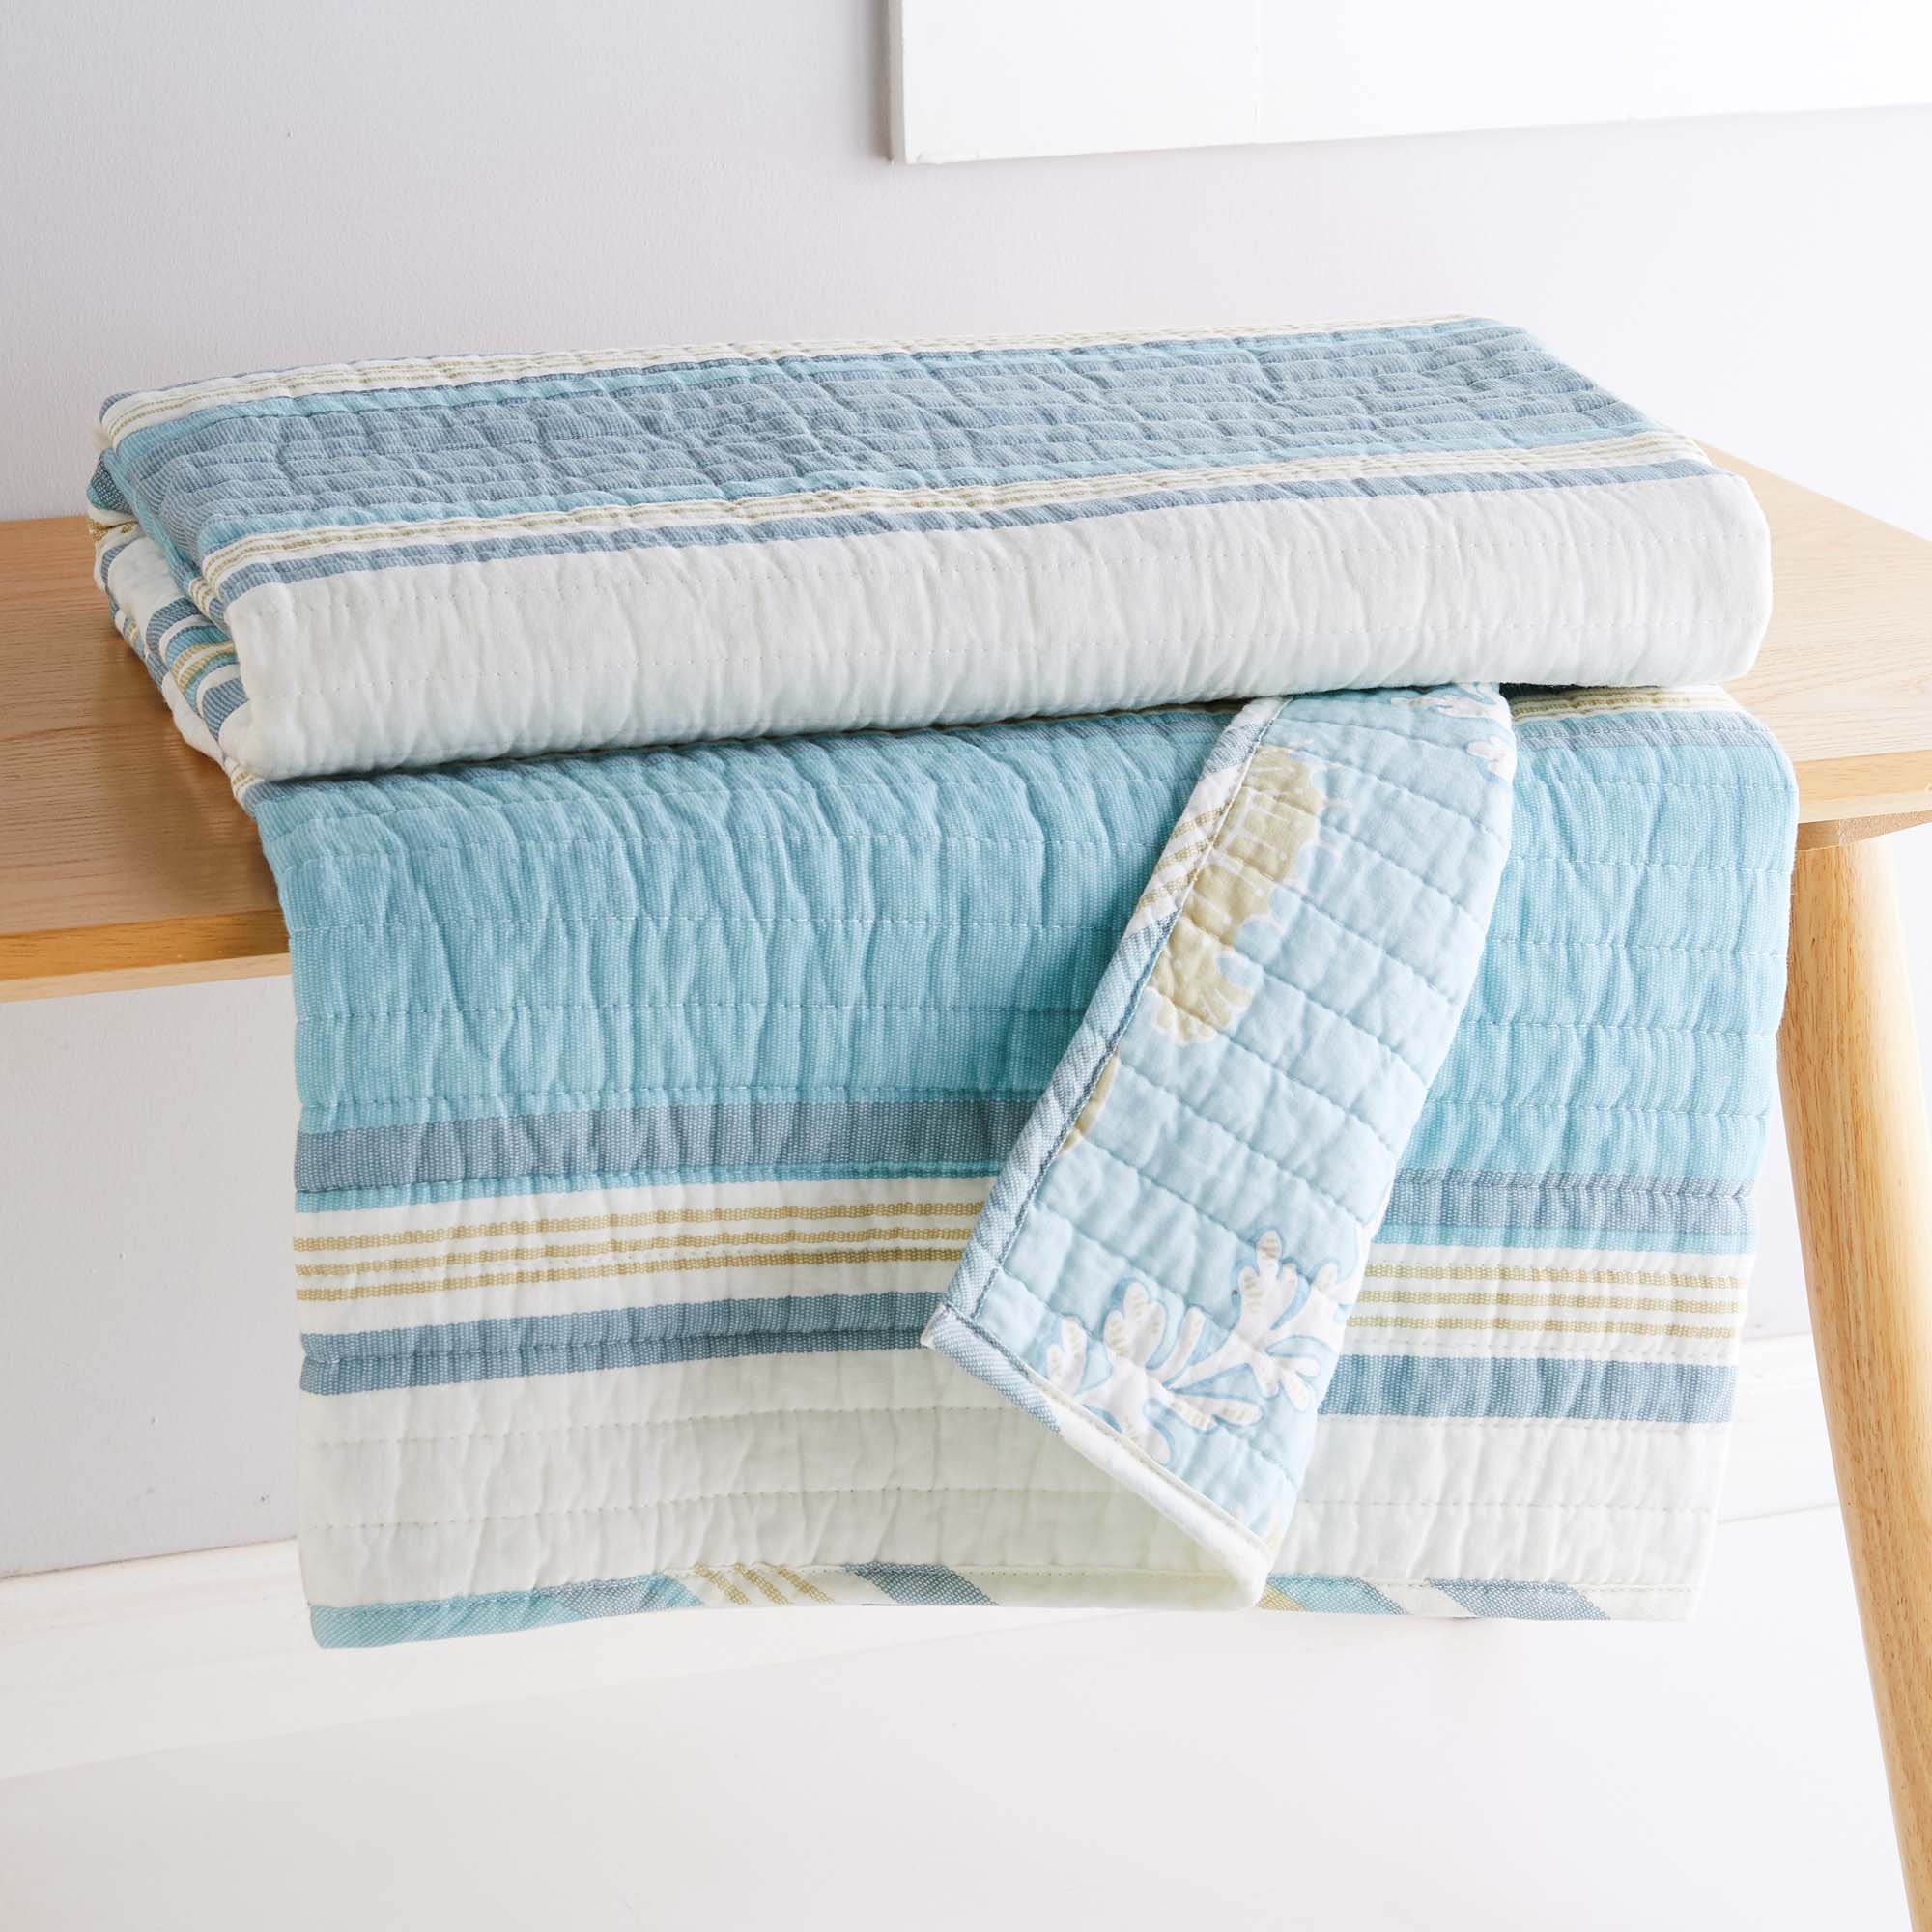 Kailua Quilted Throw